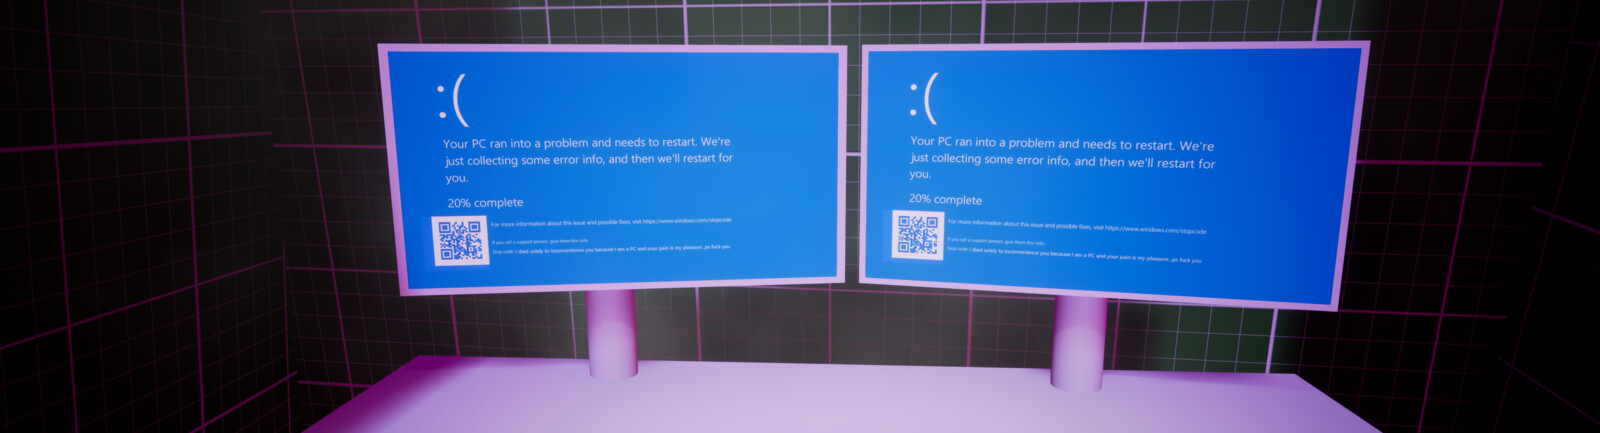 Blue screen on running desk with joke in QR code and on error message